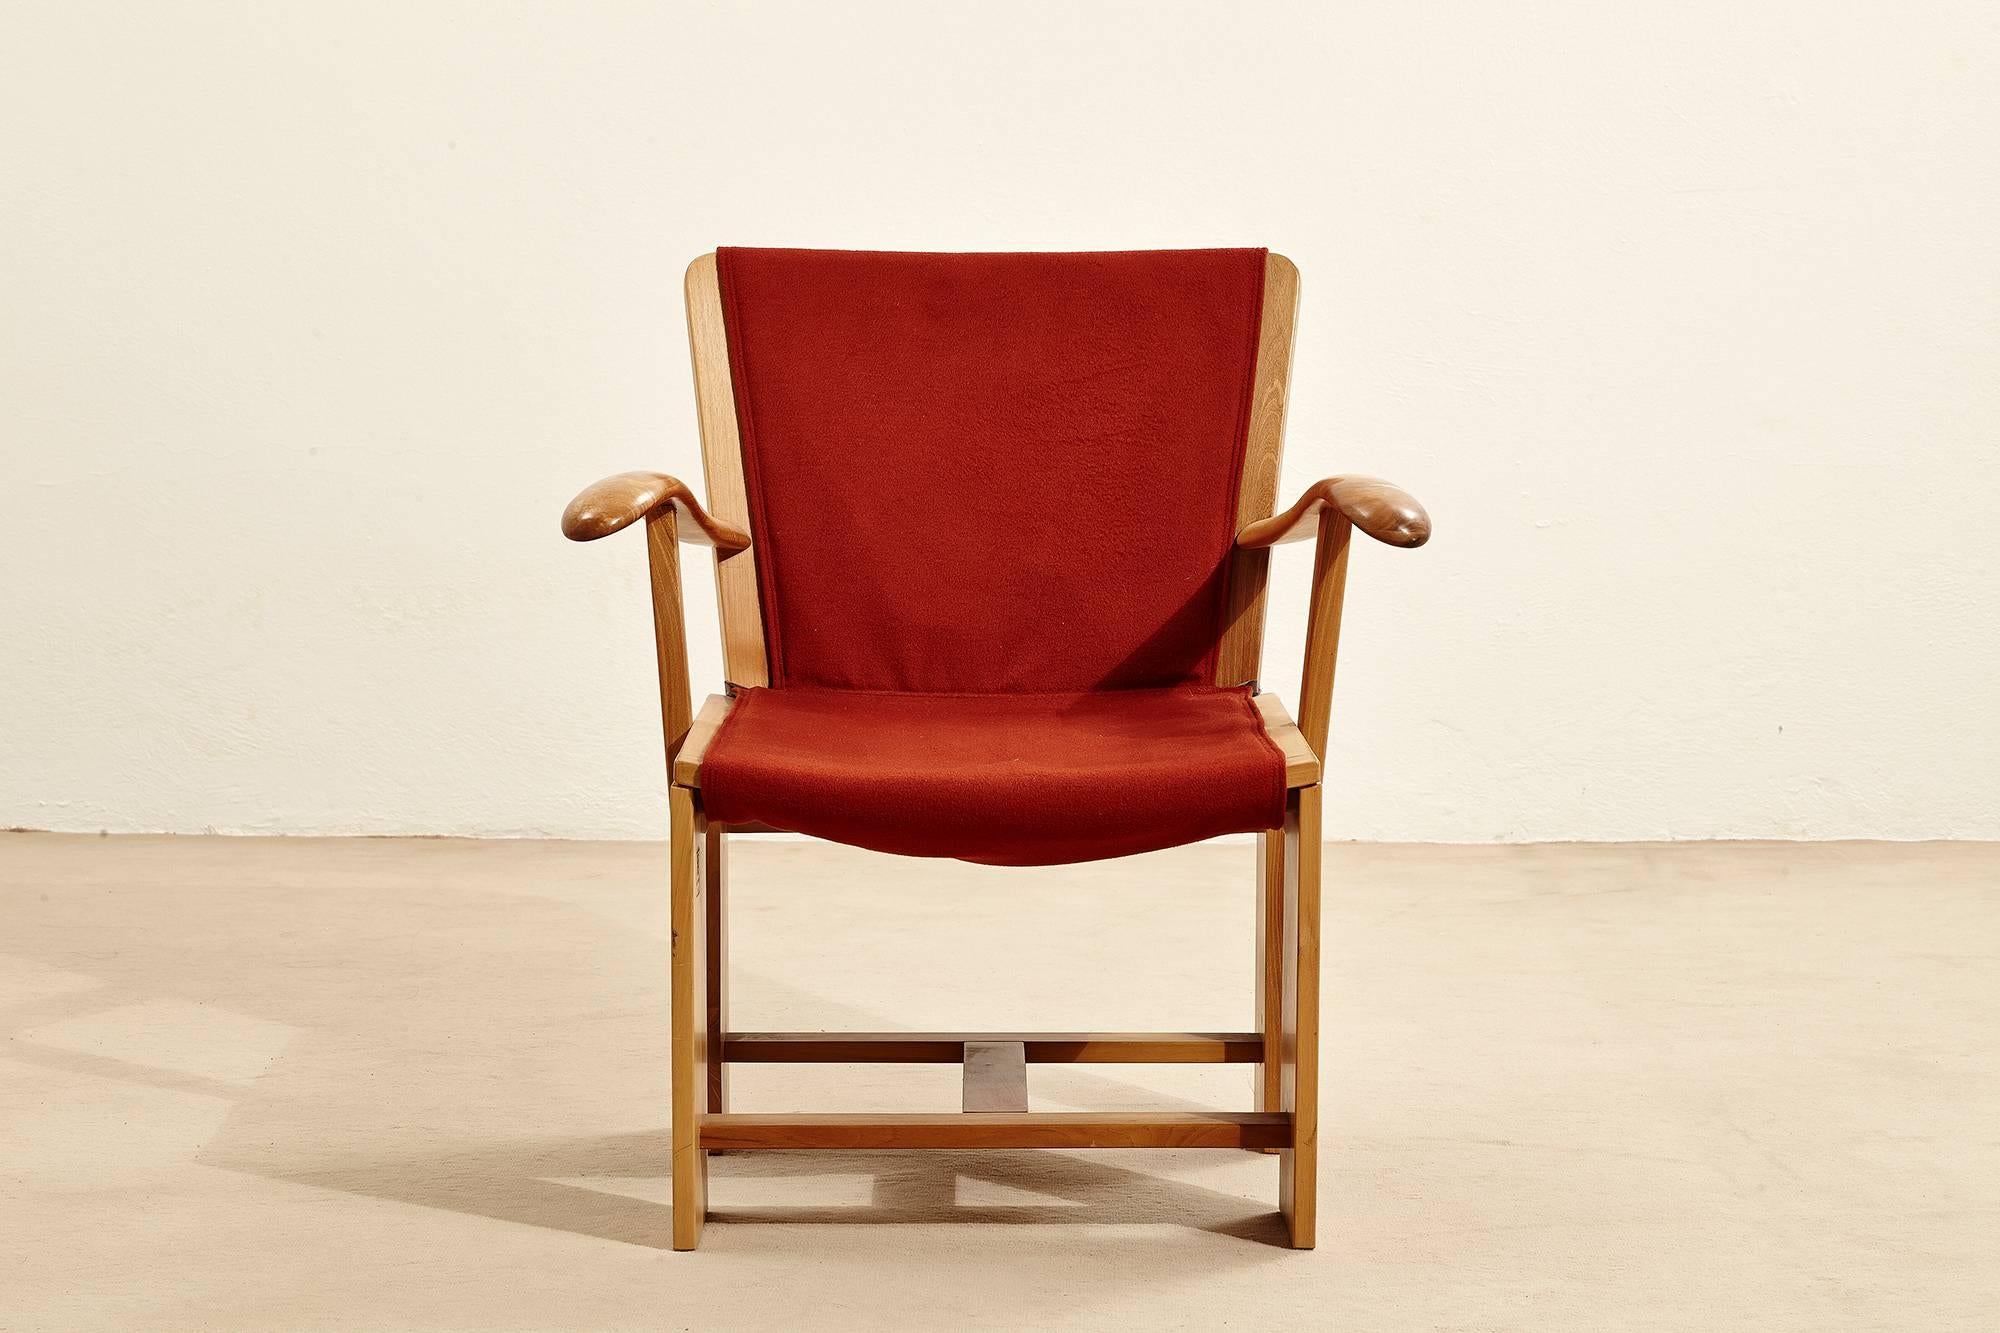 Armchair in natural walnut wood with double-faced, rust-colored upholstery. Designed by Carlo Scarpa for Italian firm Bernini in 1977.
The is a small patch of white plaster on one of the armrests.